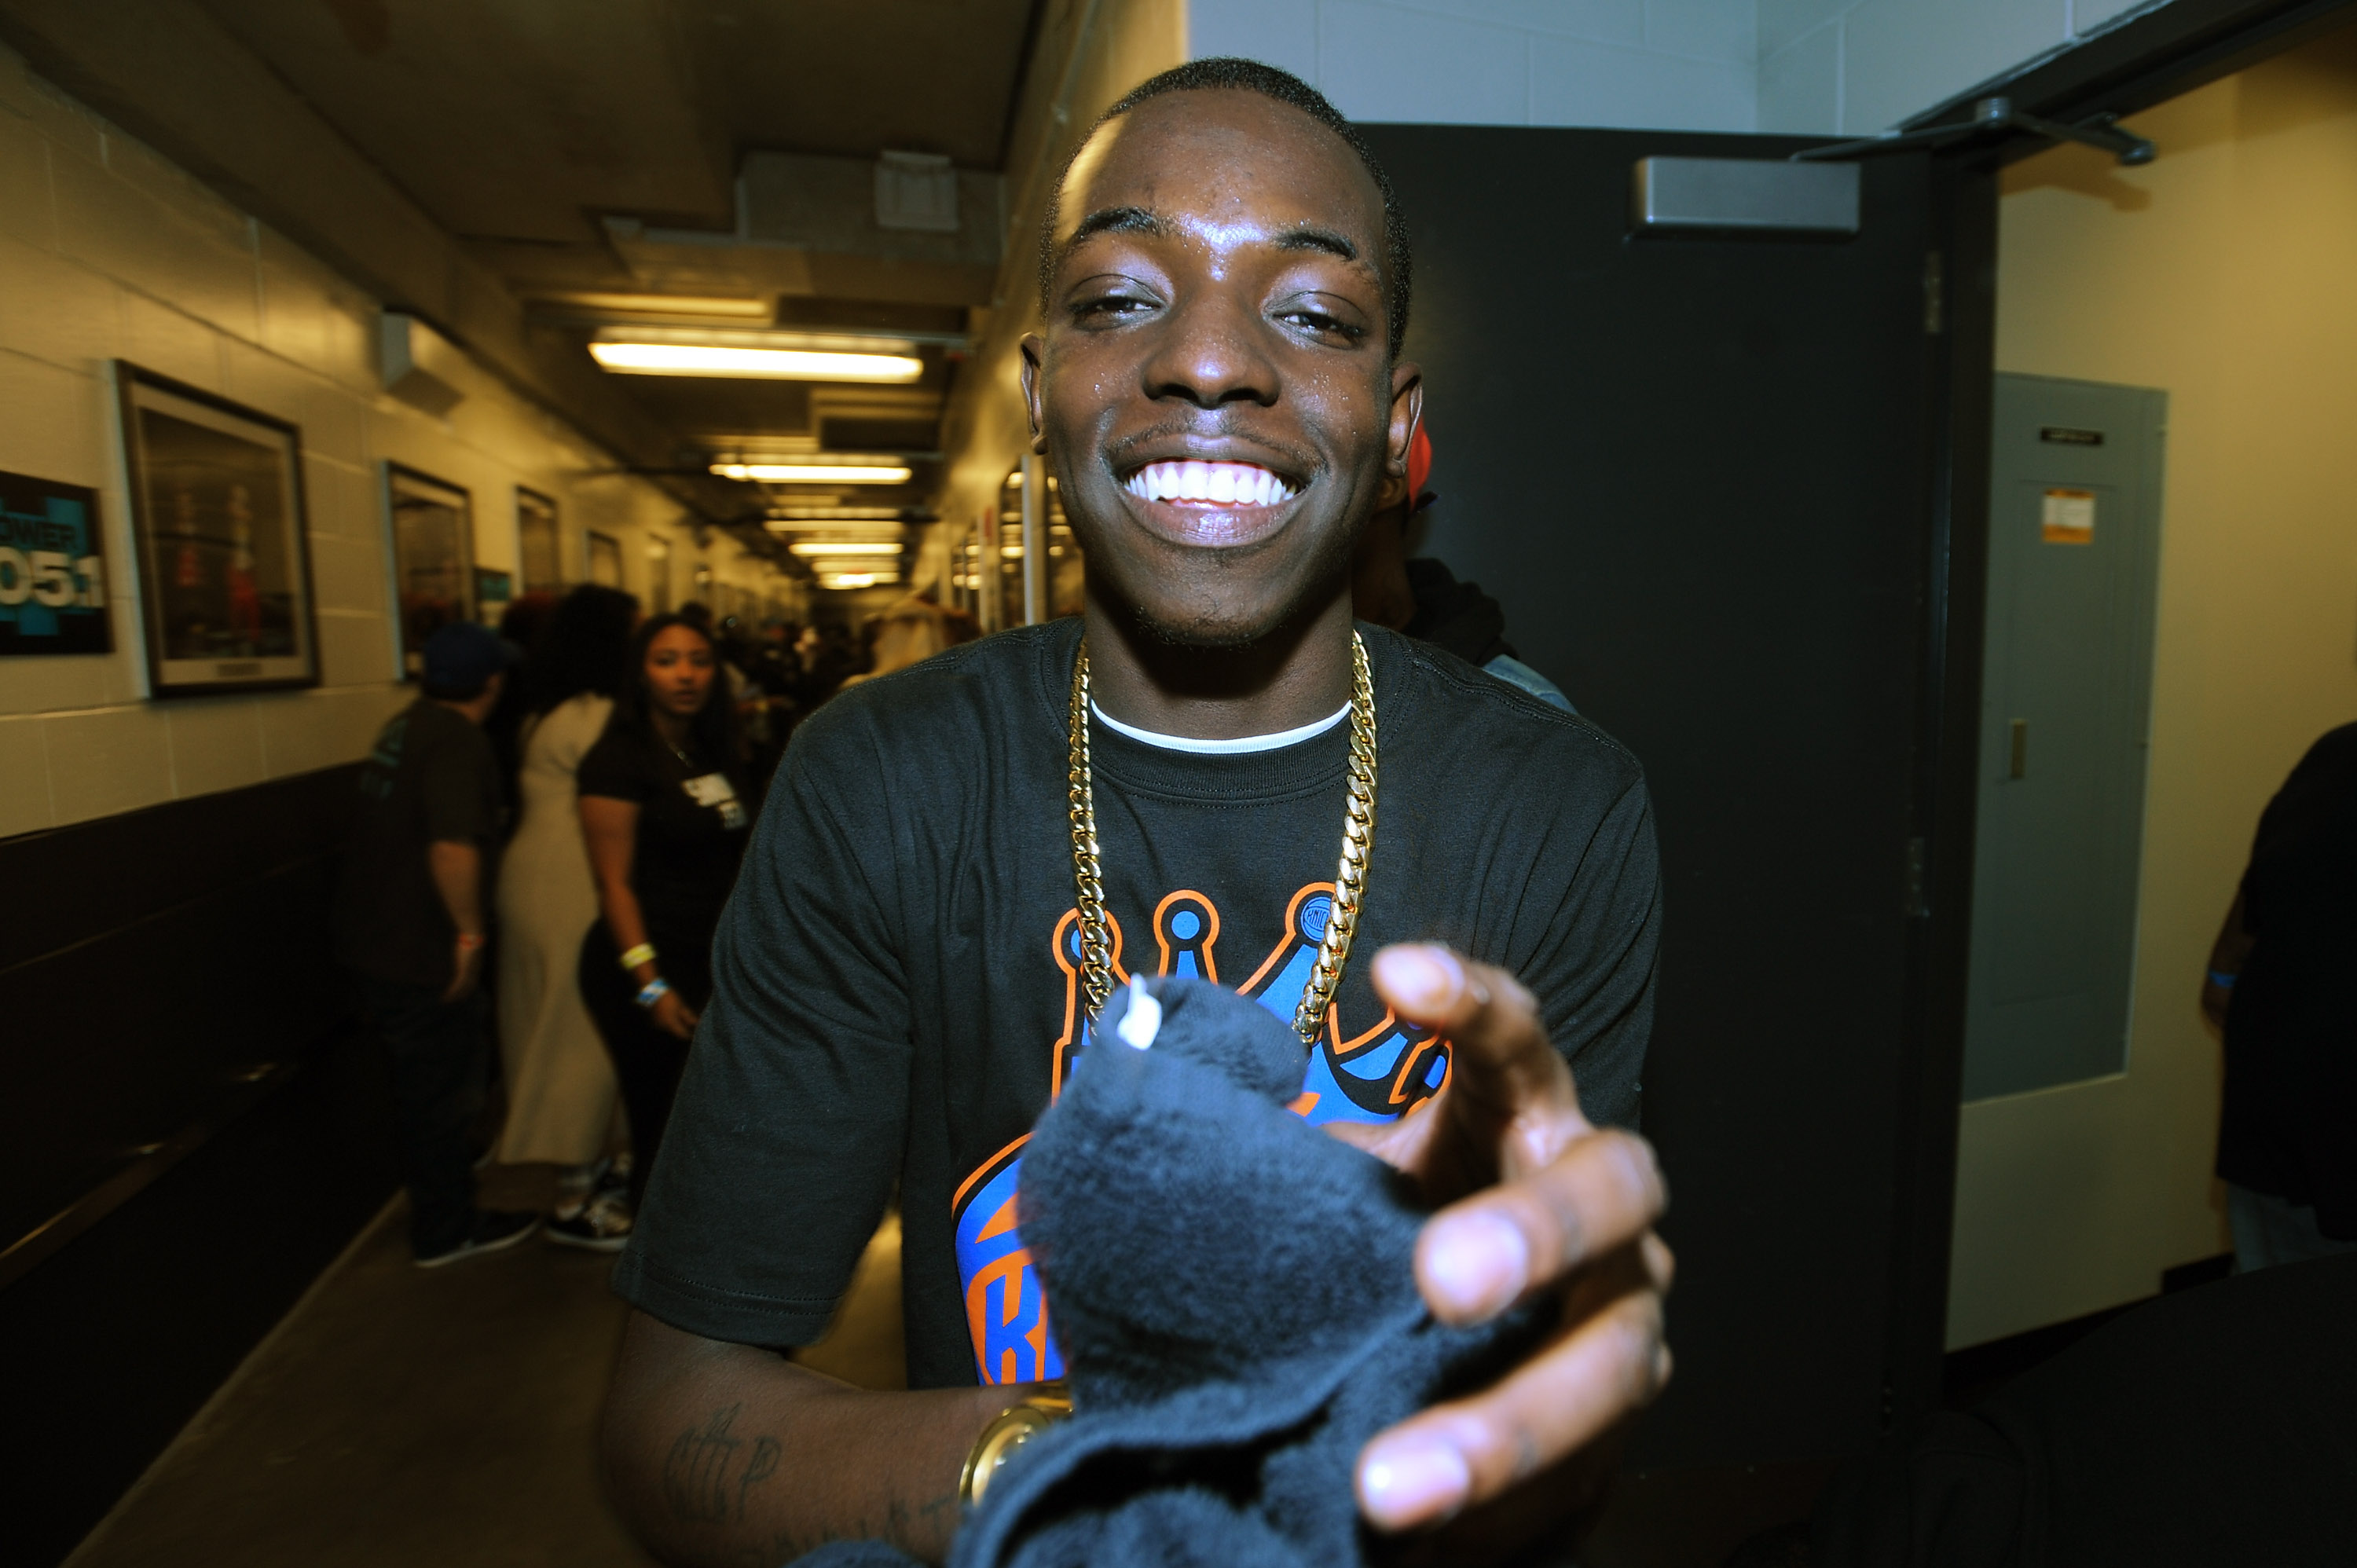 Bobby Shmurda’s Dropping A Mixtape While In Prison, Fivio Foreign Says